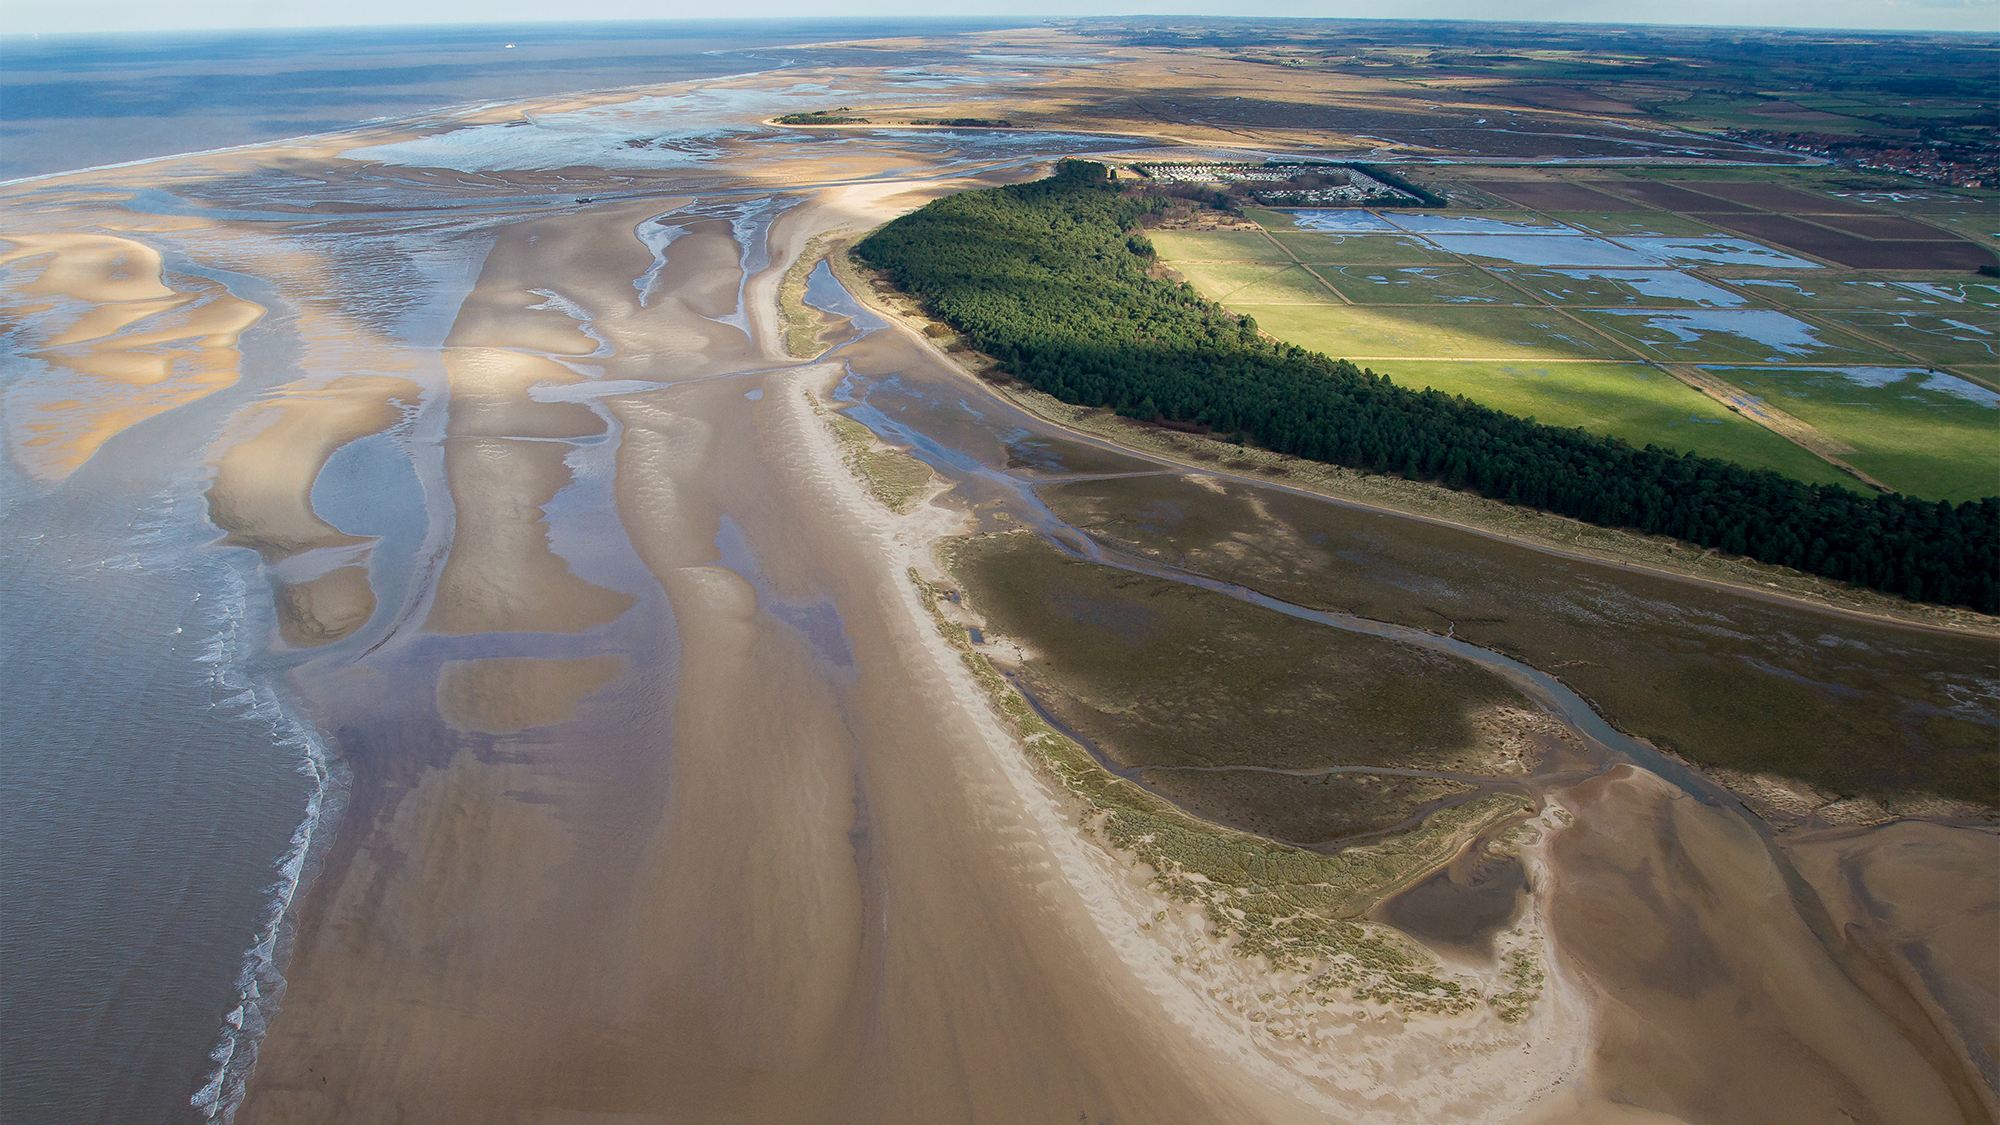 Aerial view of Holkham National Nature Reserve, Norfolk coast